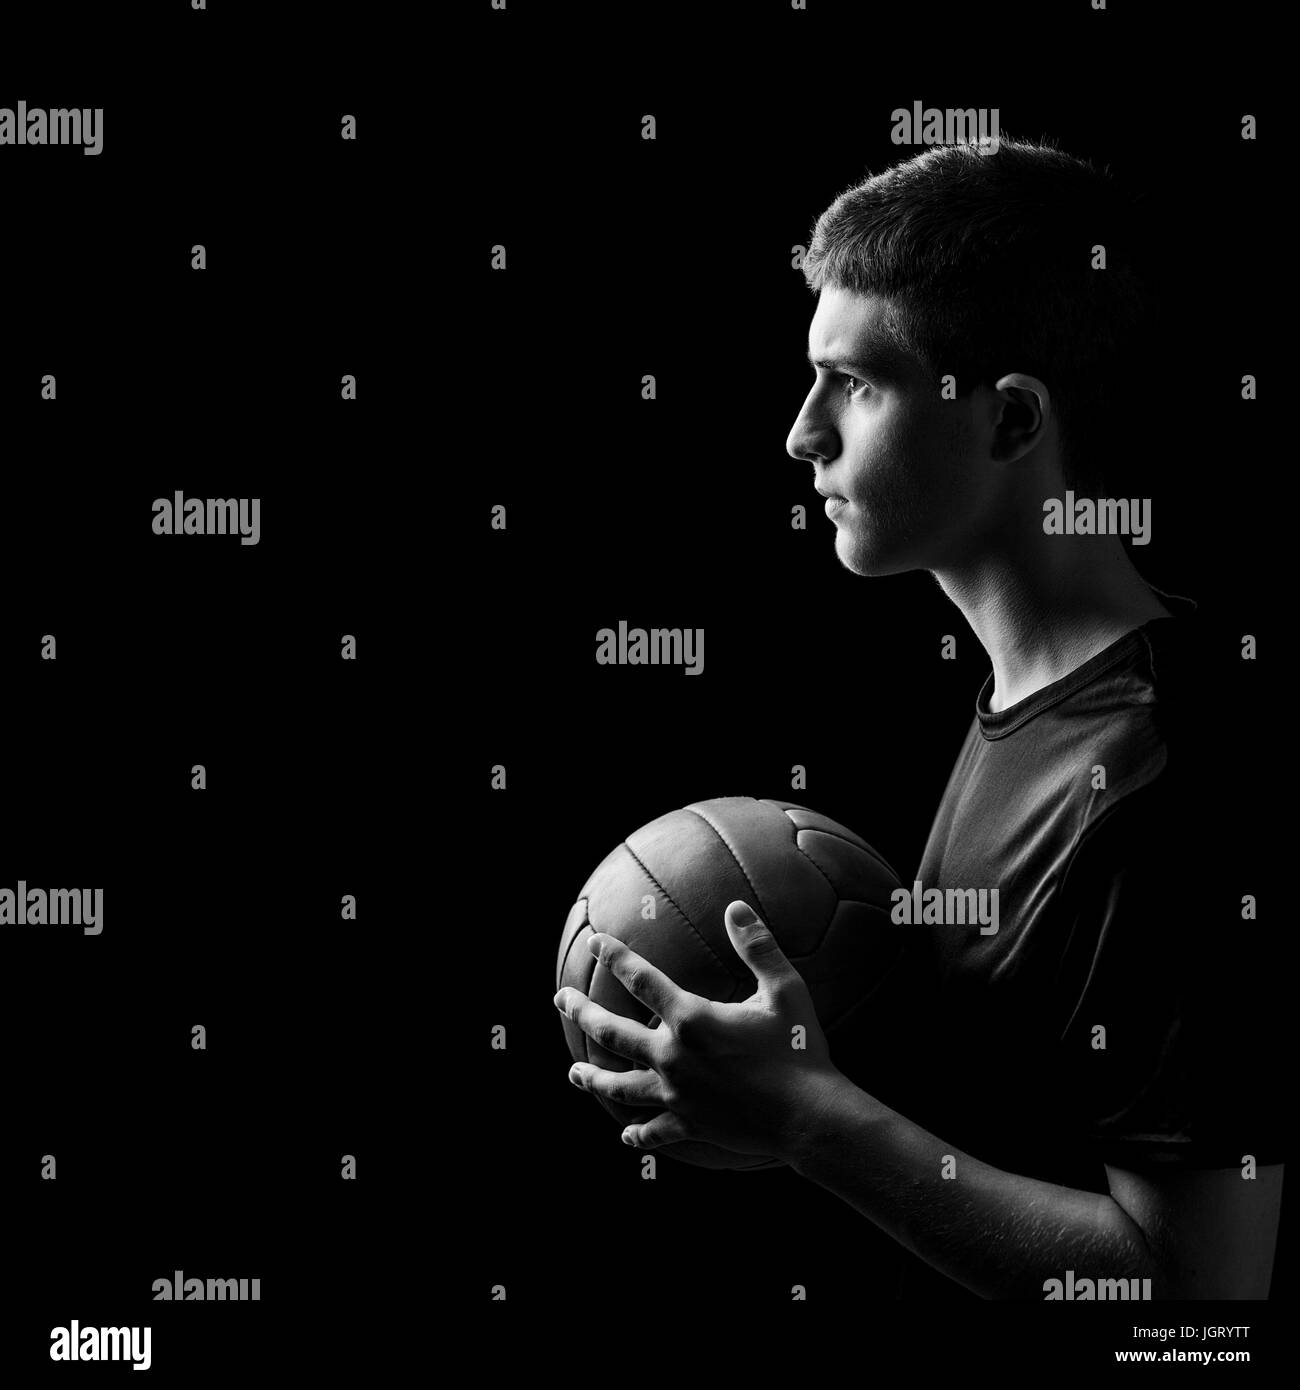 black and white portrait of young soccer player Stock Photo